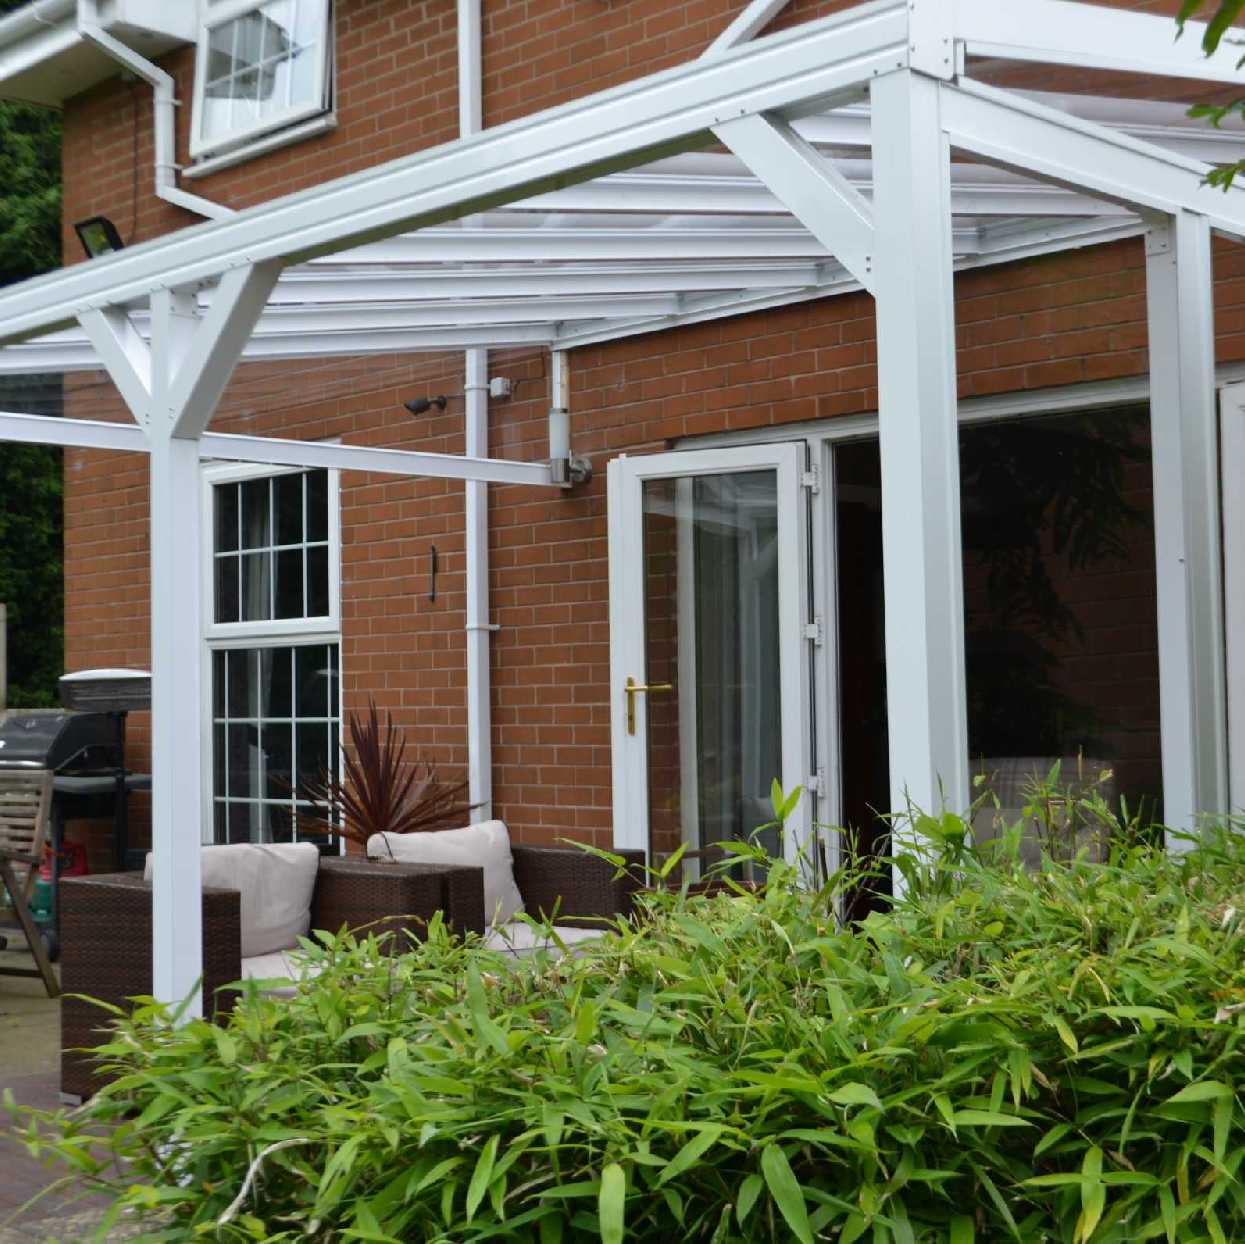 Omega Smart Lean-To Canopy, White with 6mm Glass Clear Plate Polycarbonate Glazing - 7.7m (W) x 3.5m (P), (4) Supporting Posts from Omega Build